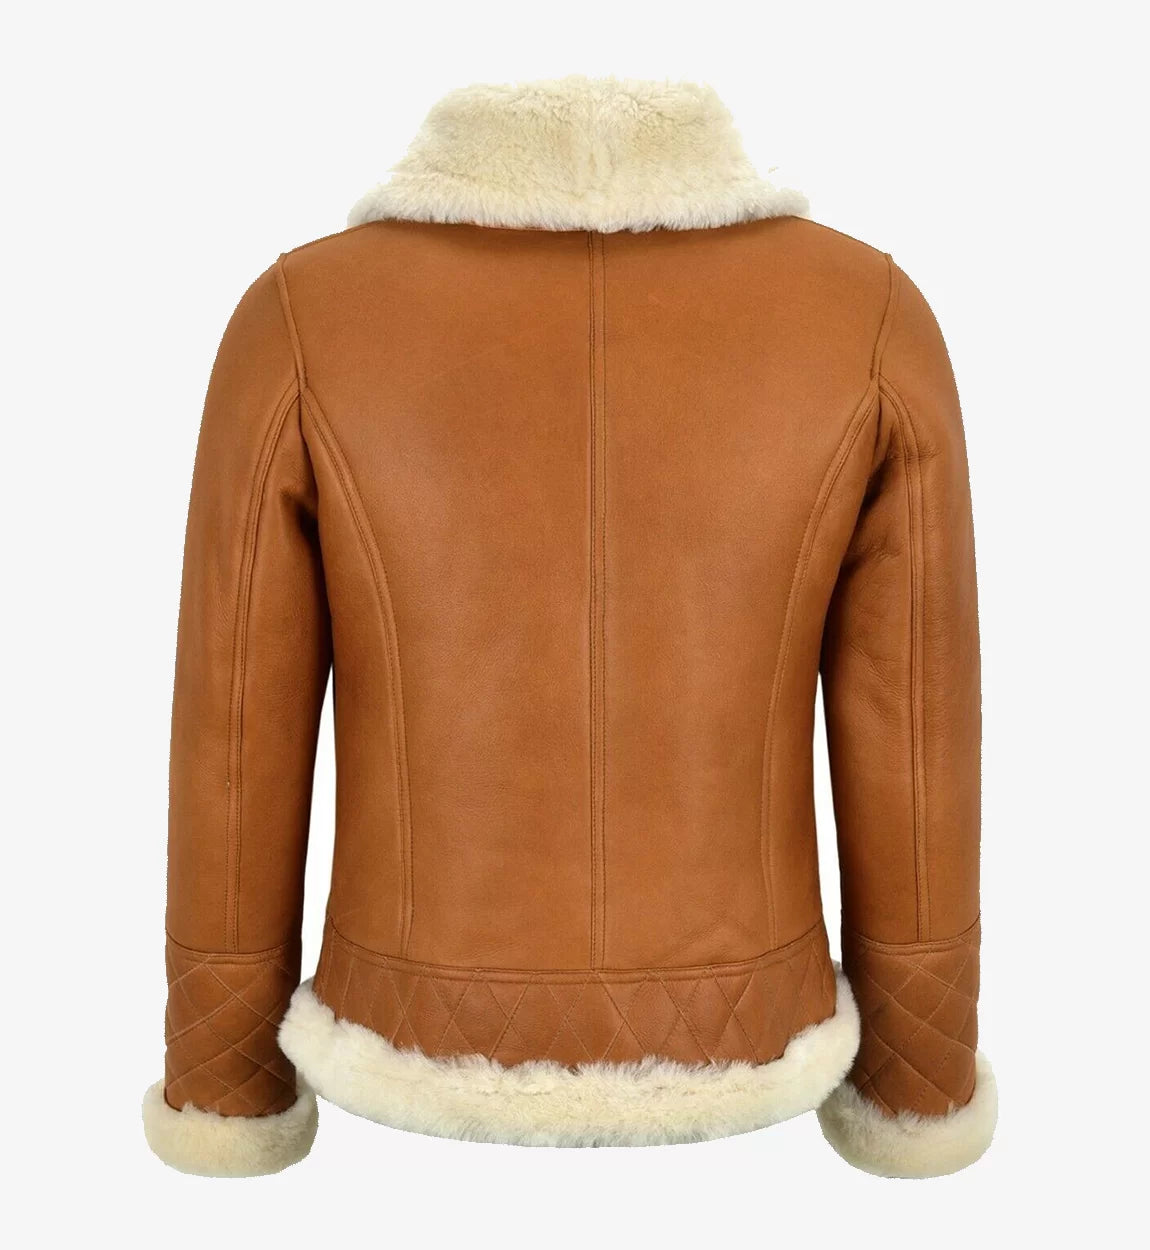 WOMEN's Brown Bomber Leather Jacket